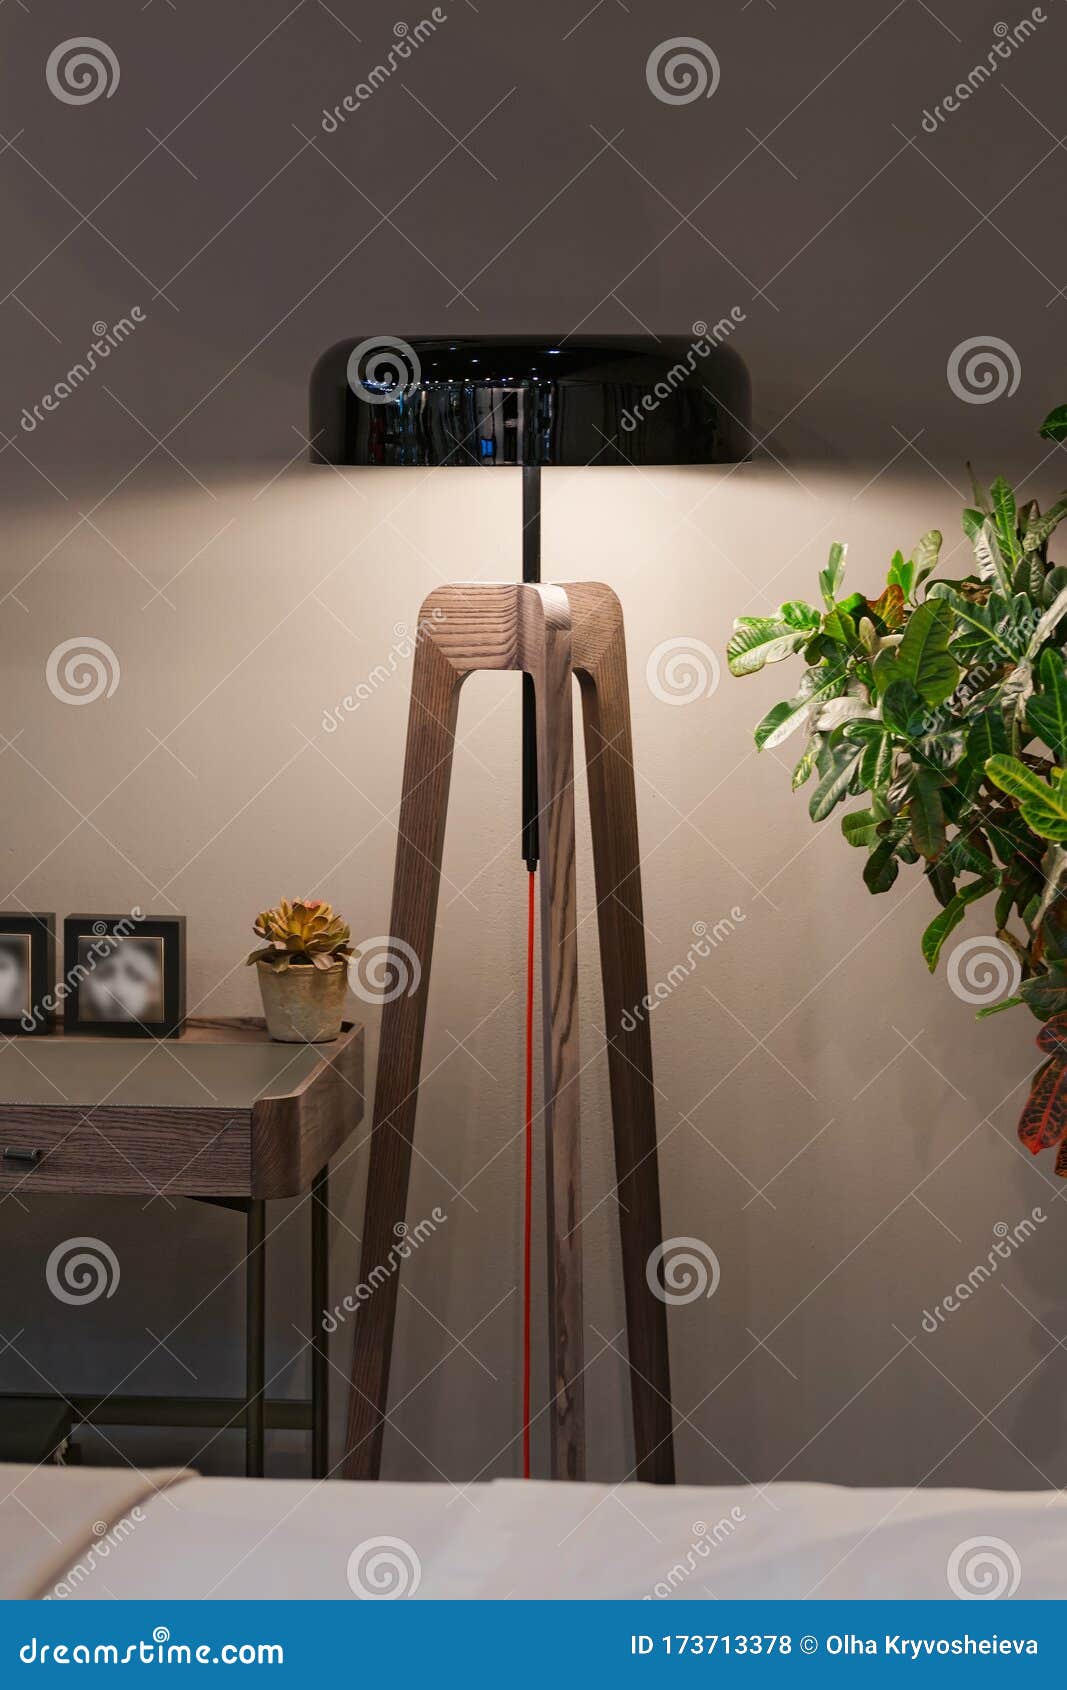 Decorative Tripos Wooden Standing Light Floor Lamp In Bedroom Black Lacquered Floor Lamp Shade Stock Photo Image Of Contemporary Bright 173713378